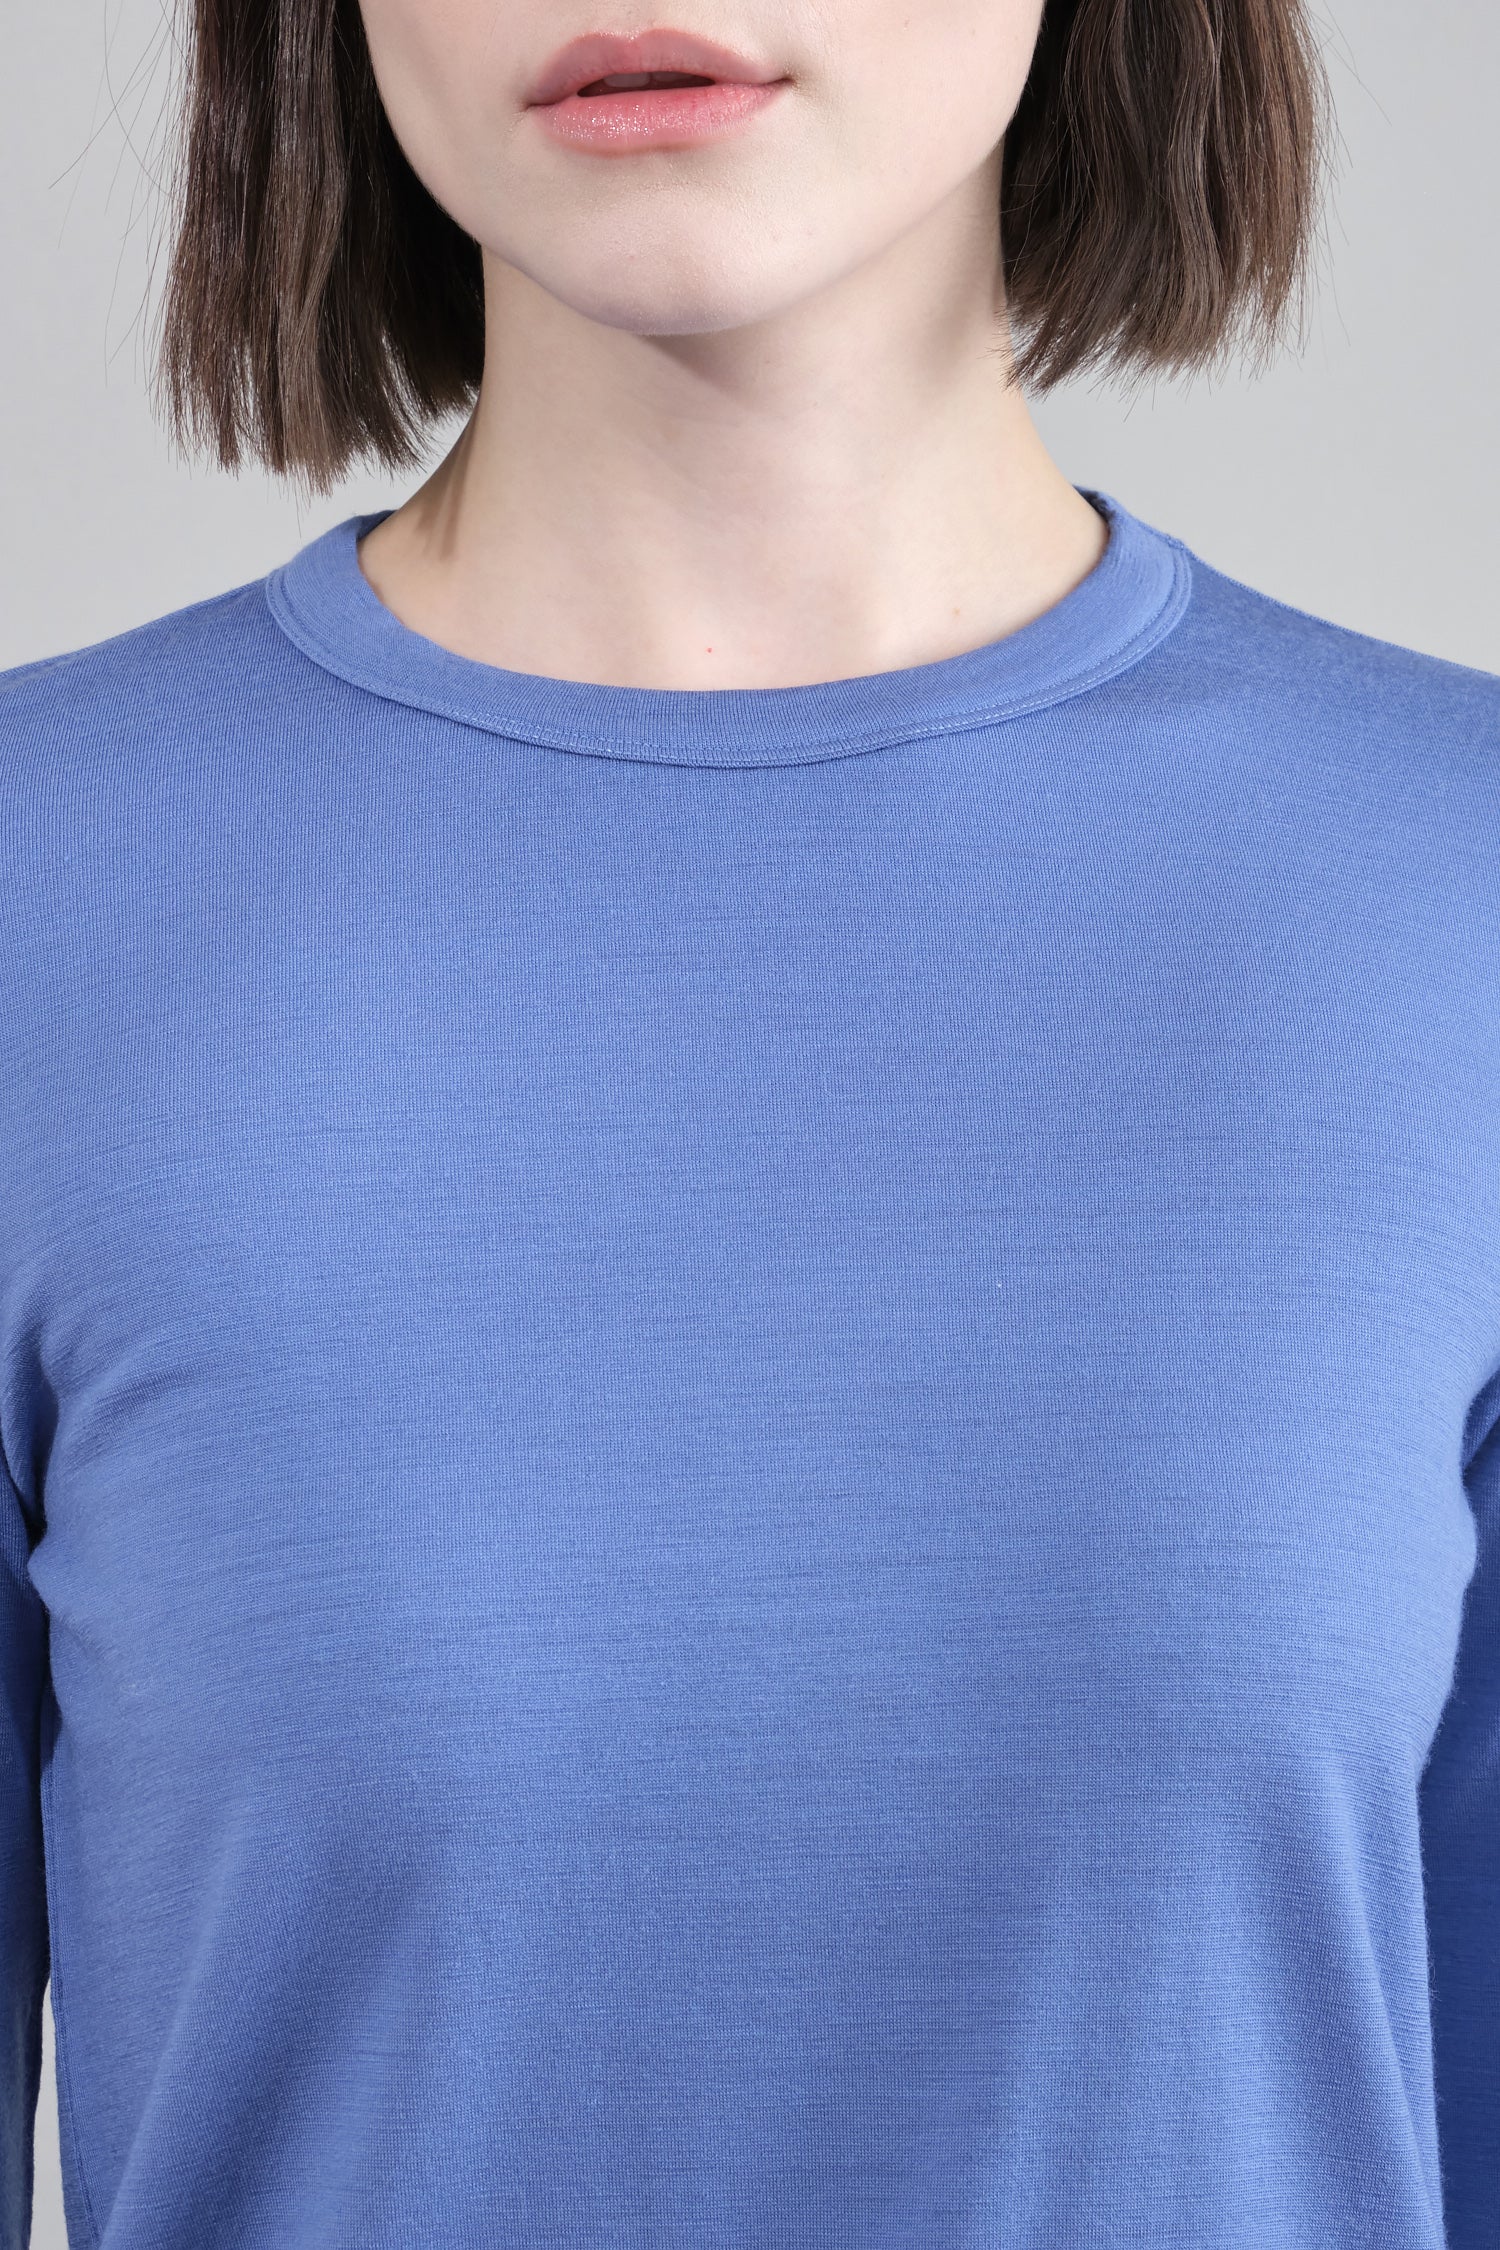 Neckline on Tad Long Sleeve Top in Anemome